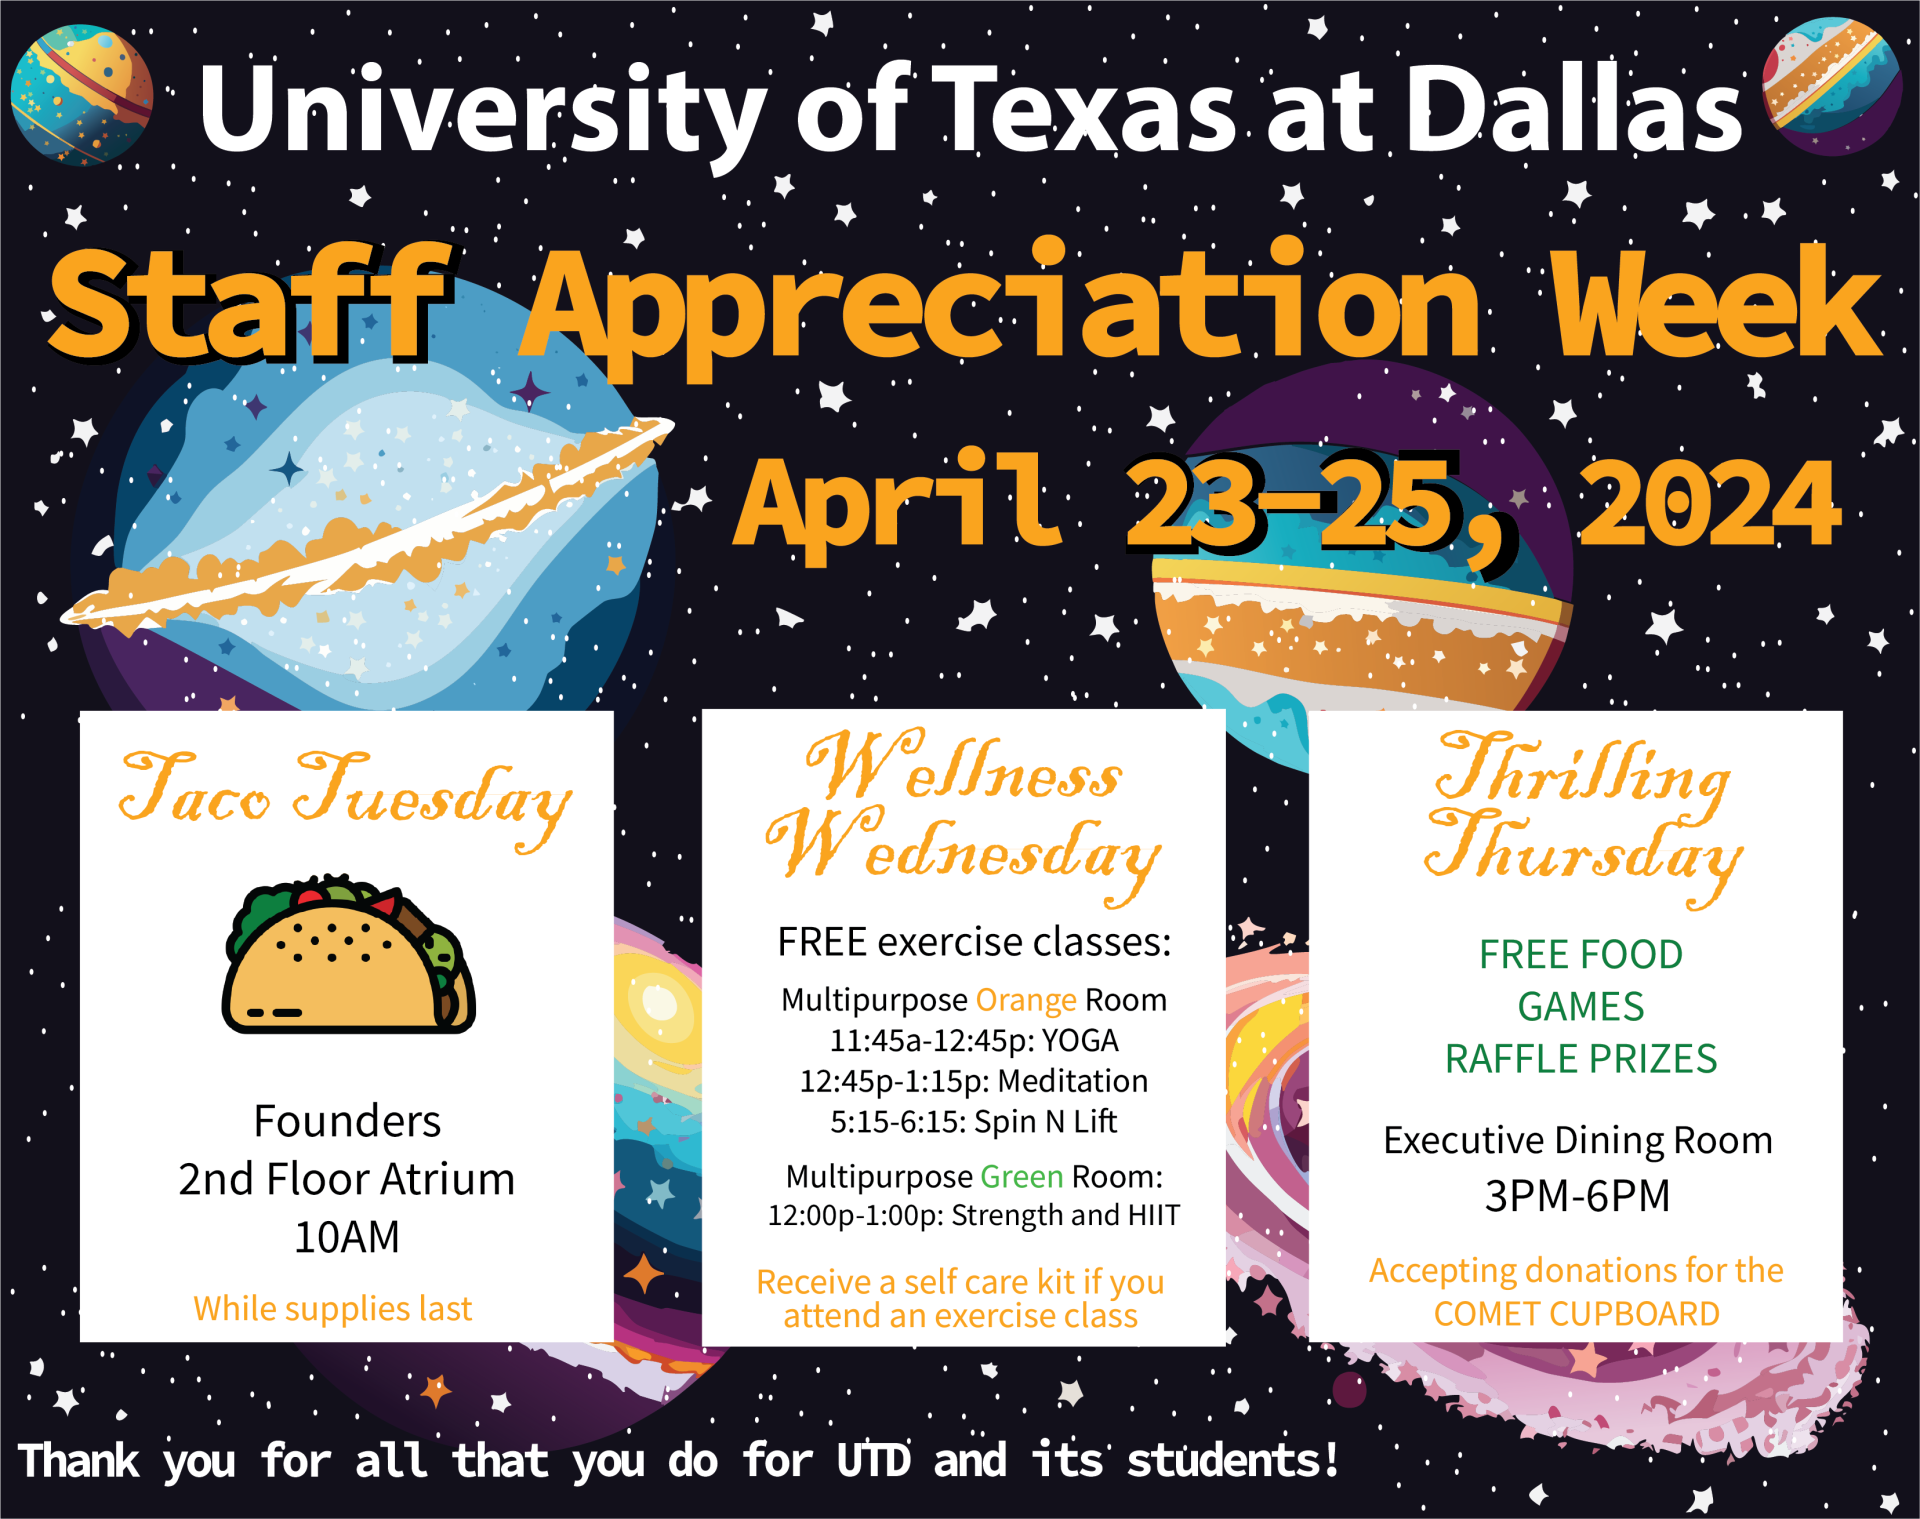 The Staff Council is hosting a week of events to show appreciation for staff members. Taco Tuesday kicks off at 10 am on the 2nd floor of Founders, offering both meat and veggie options for tacos. Wellness Wednesday invites everyone to the Activity Center for free classes during lunch and after 5:00 pm; remember to bring your ID. Thursday brings a three-hour extravaganza in the JSOM Executive Dining Hall, filled with food, games, and raffles. Staff are encouraged to bring donations for the Comet Cupboard. Let's come together to celebrate our amazing staff!